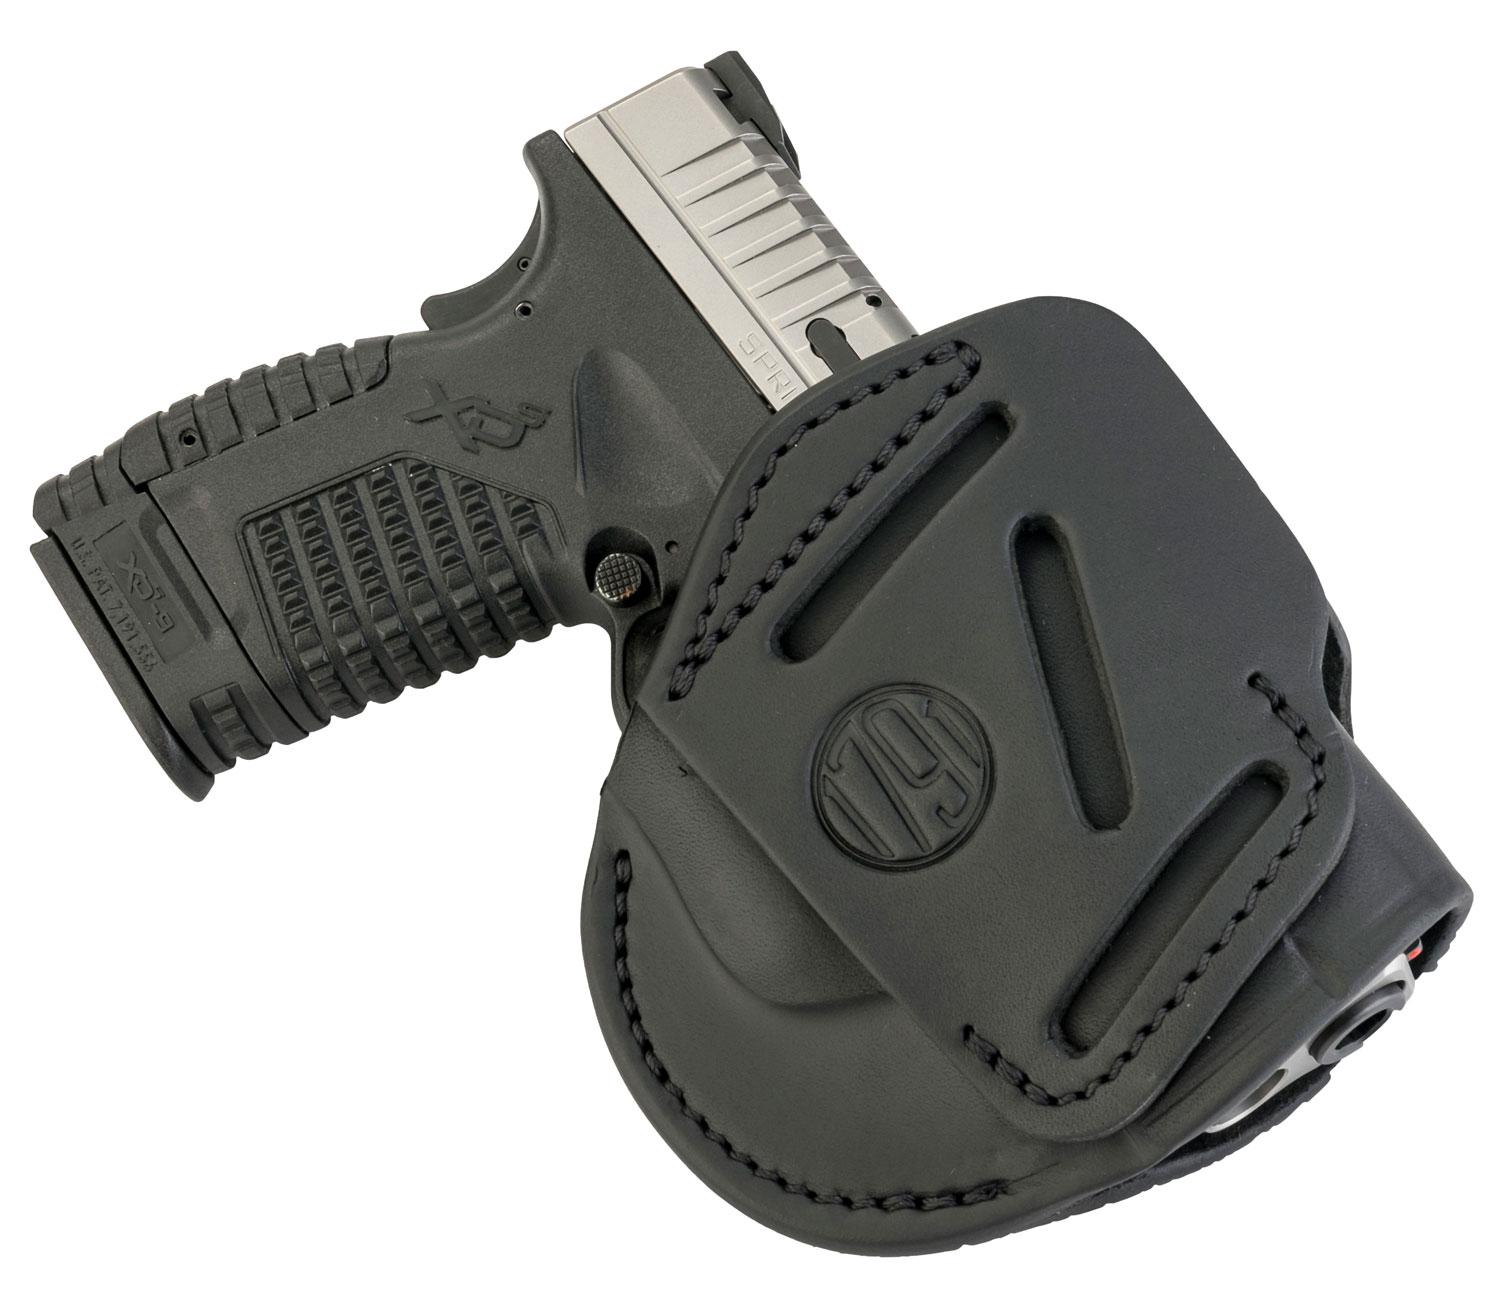  3 Way Holster Ax Size 4 Stealth Black